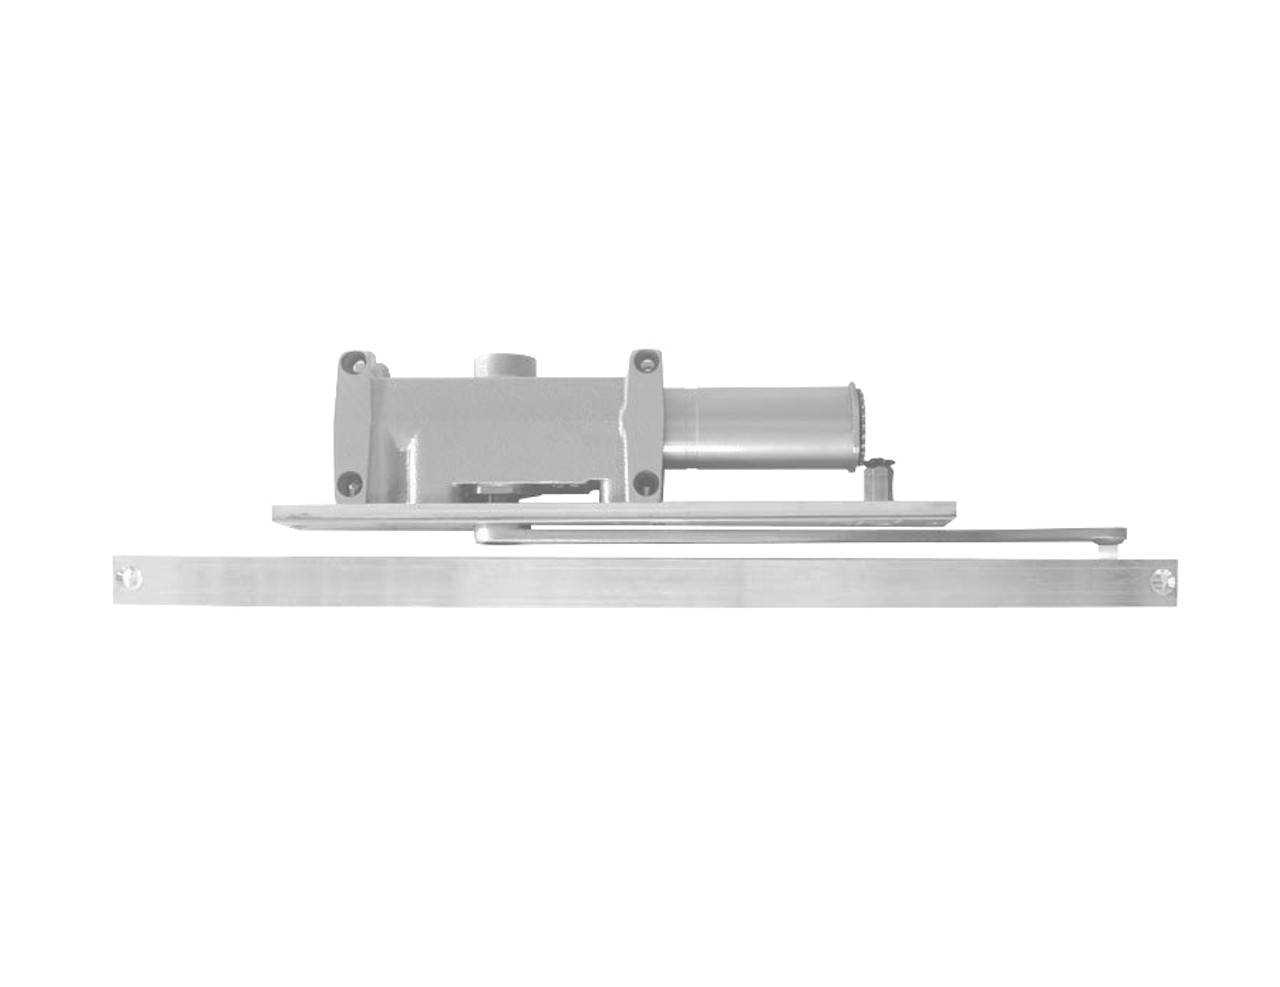 2013-H-RH-LH-US26D LCN Door Closer with Hold Open Arm in Satin Chrome Finish